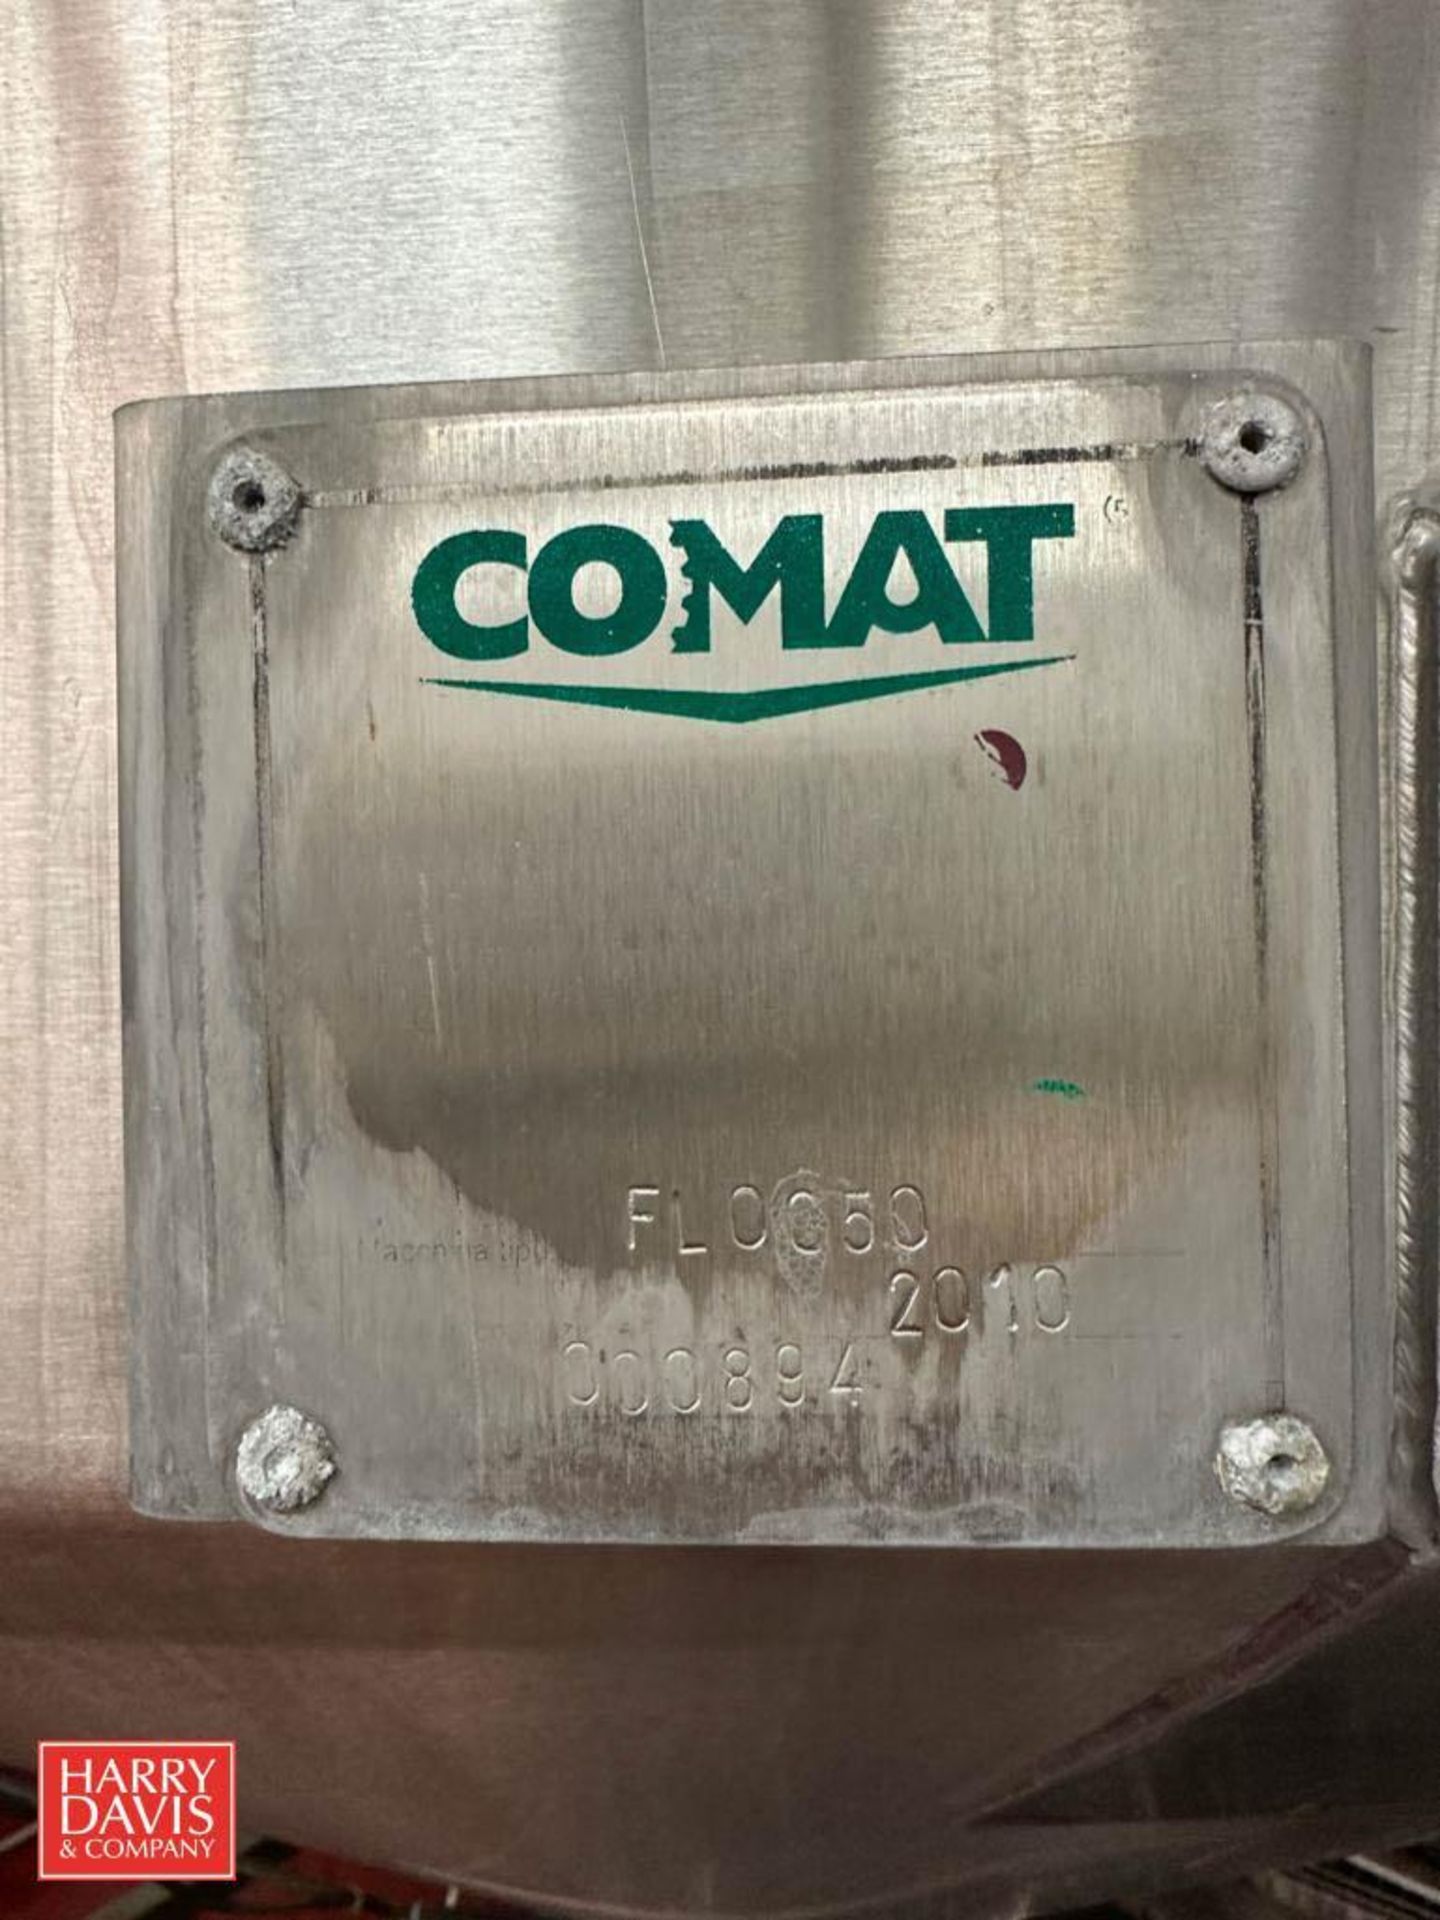 2010 Comat Insulated 500 Gallon S/S Dome-Top, Cone-Bottom Ricotta Flocculation Tank with Steam, Mode - Image 3 of 3